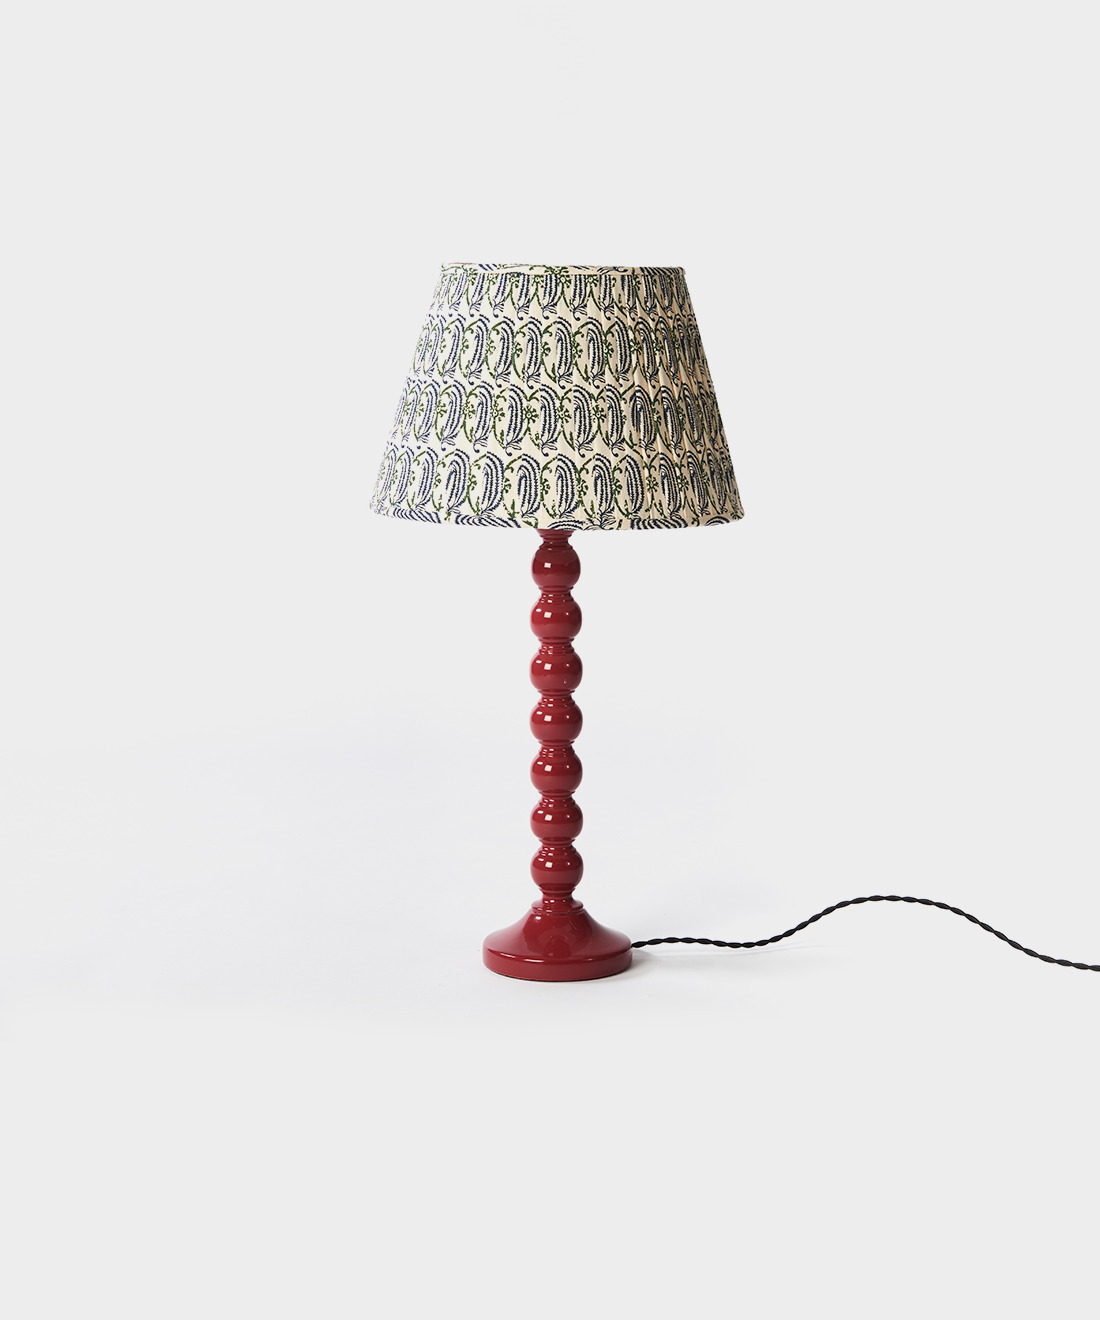 Trilogy Red Bobbin Lamp With Shade Set